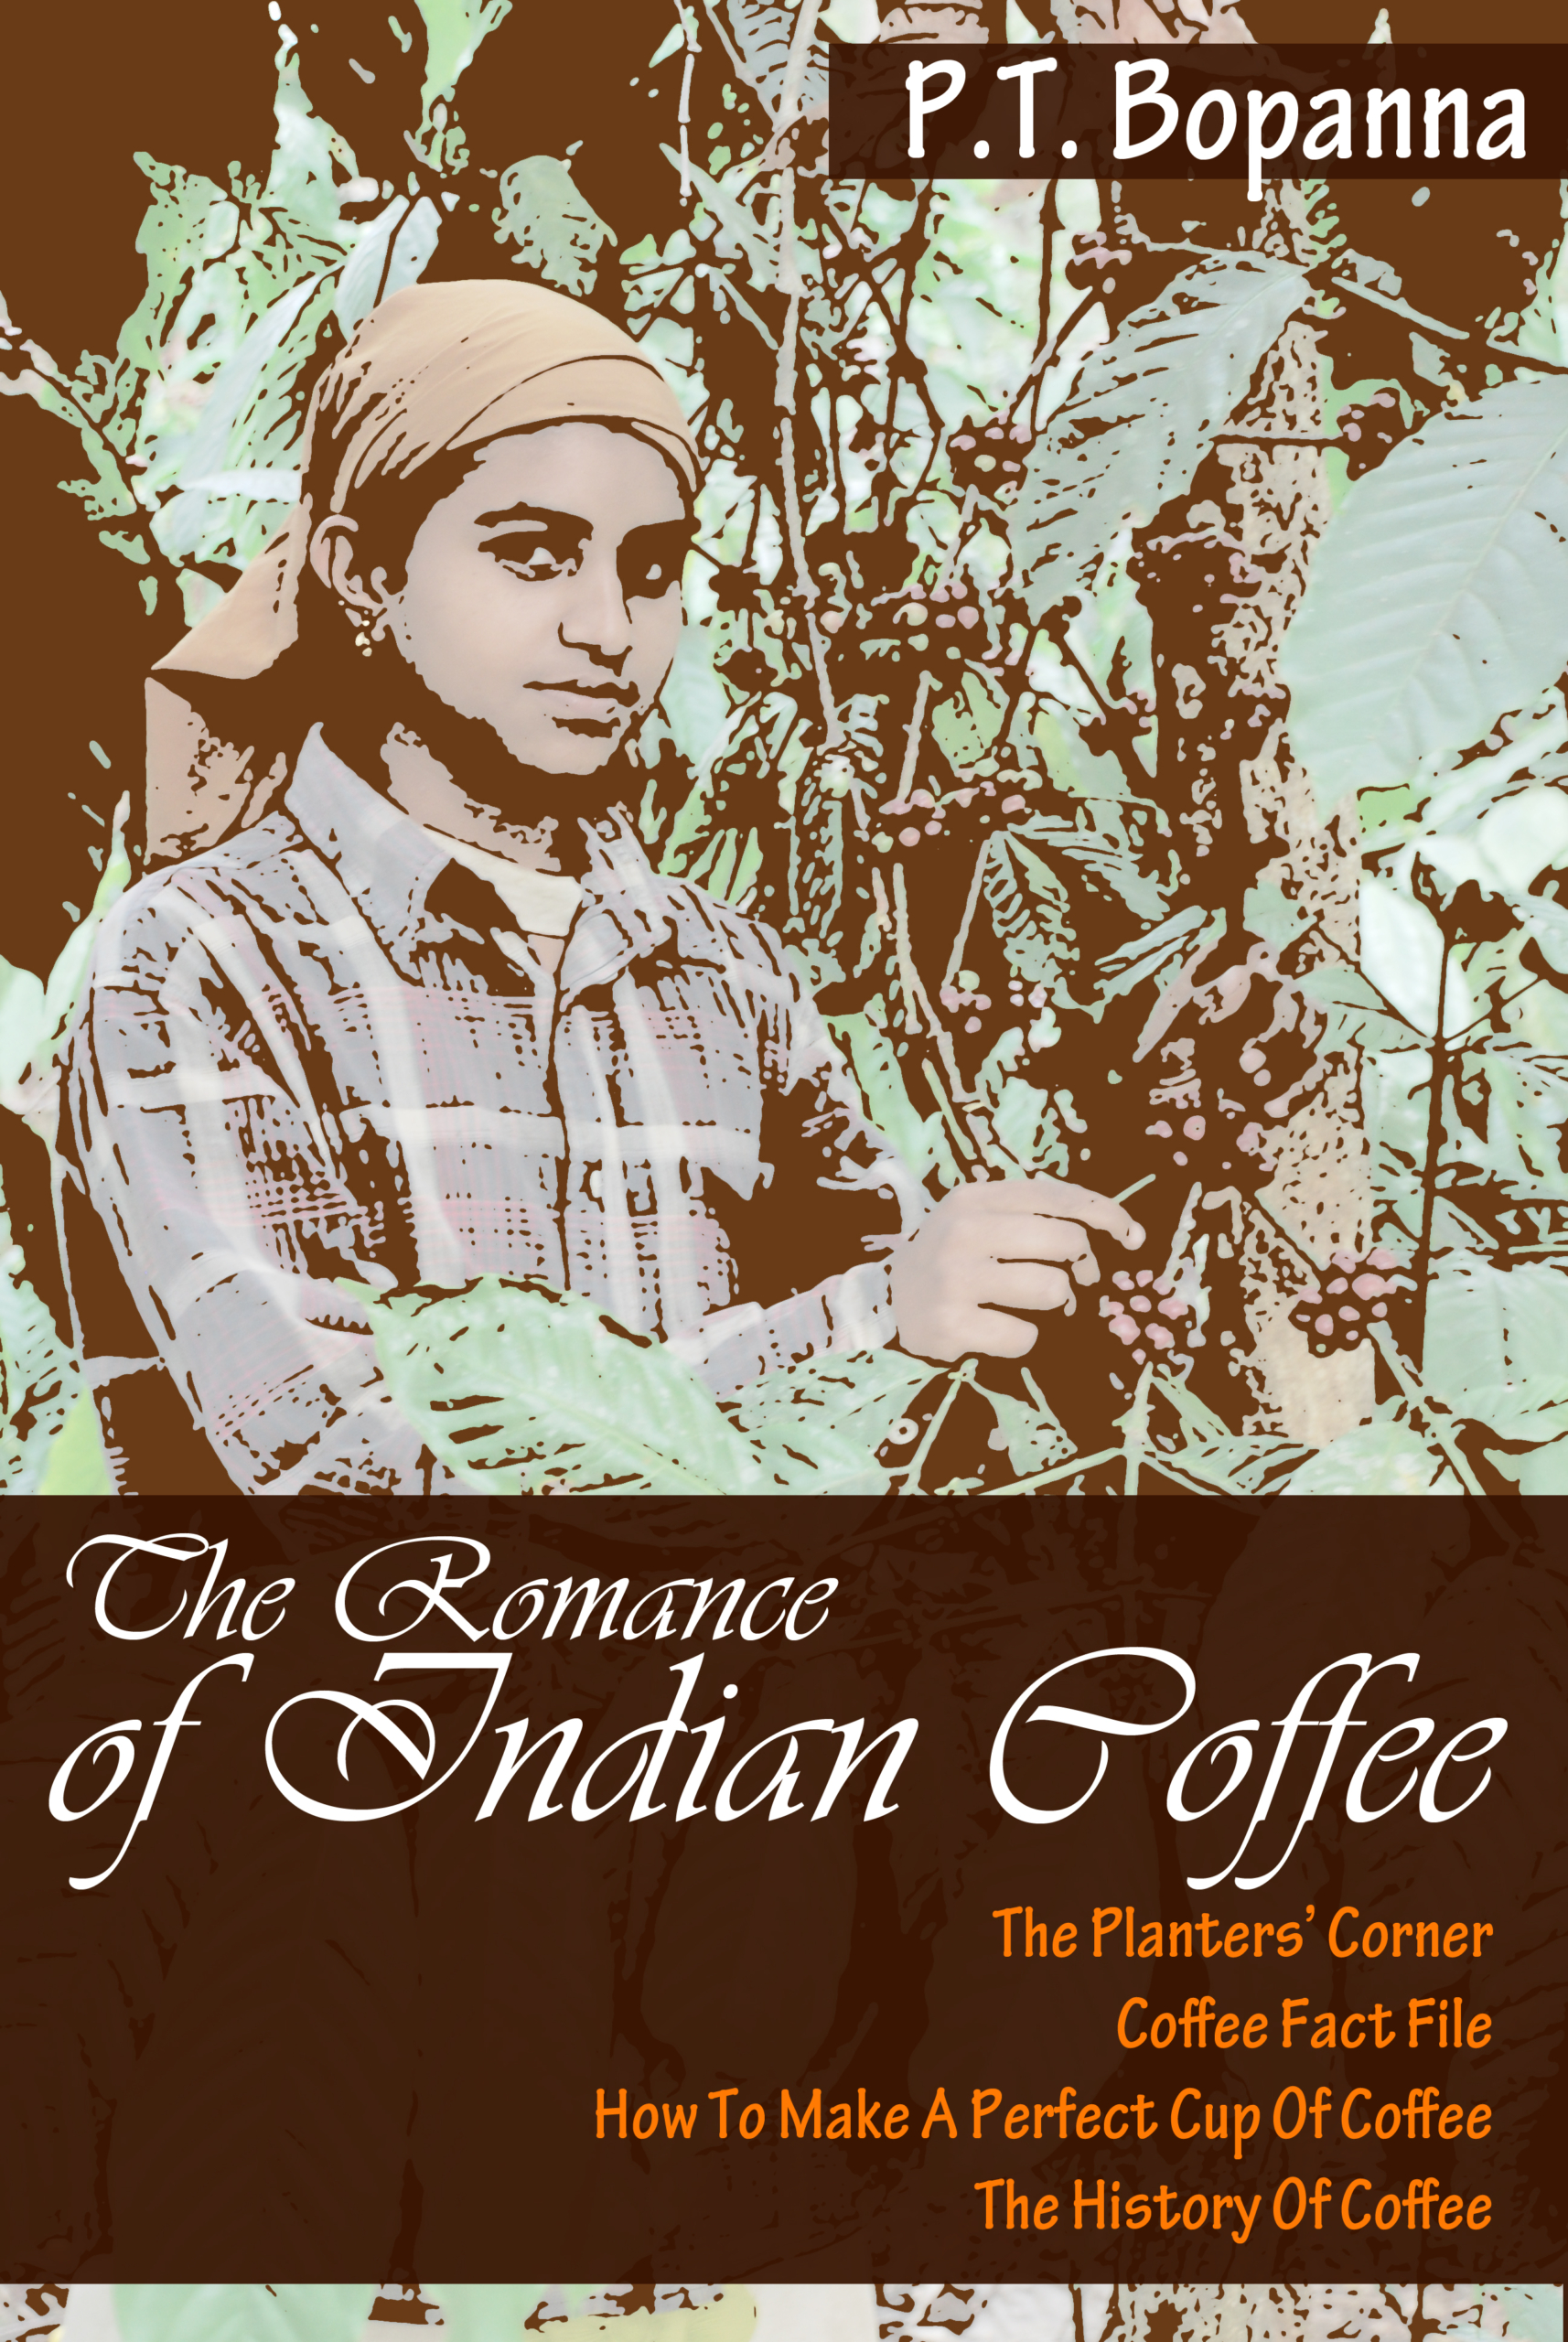 TECHNOLOGY POWERS AFFORDABLE REPRINT OF ‘THE ROMANCE OF INDIAN COFFEE’